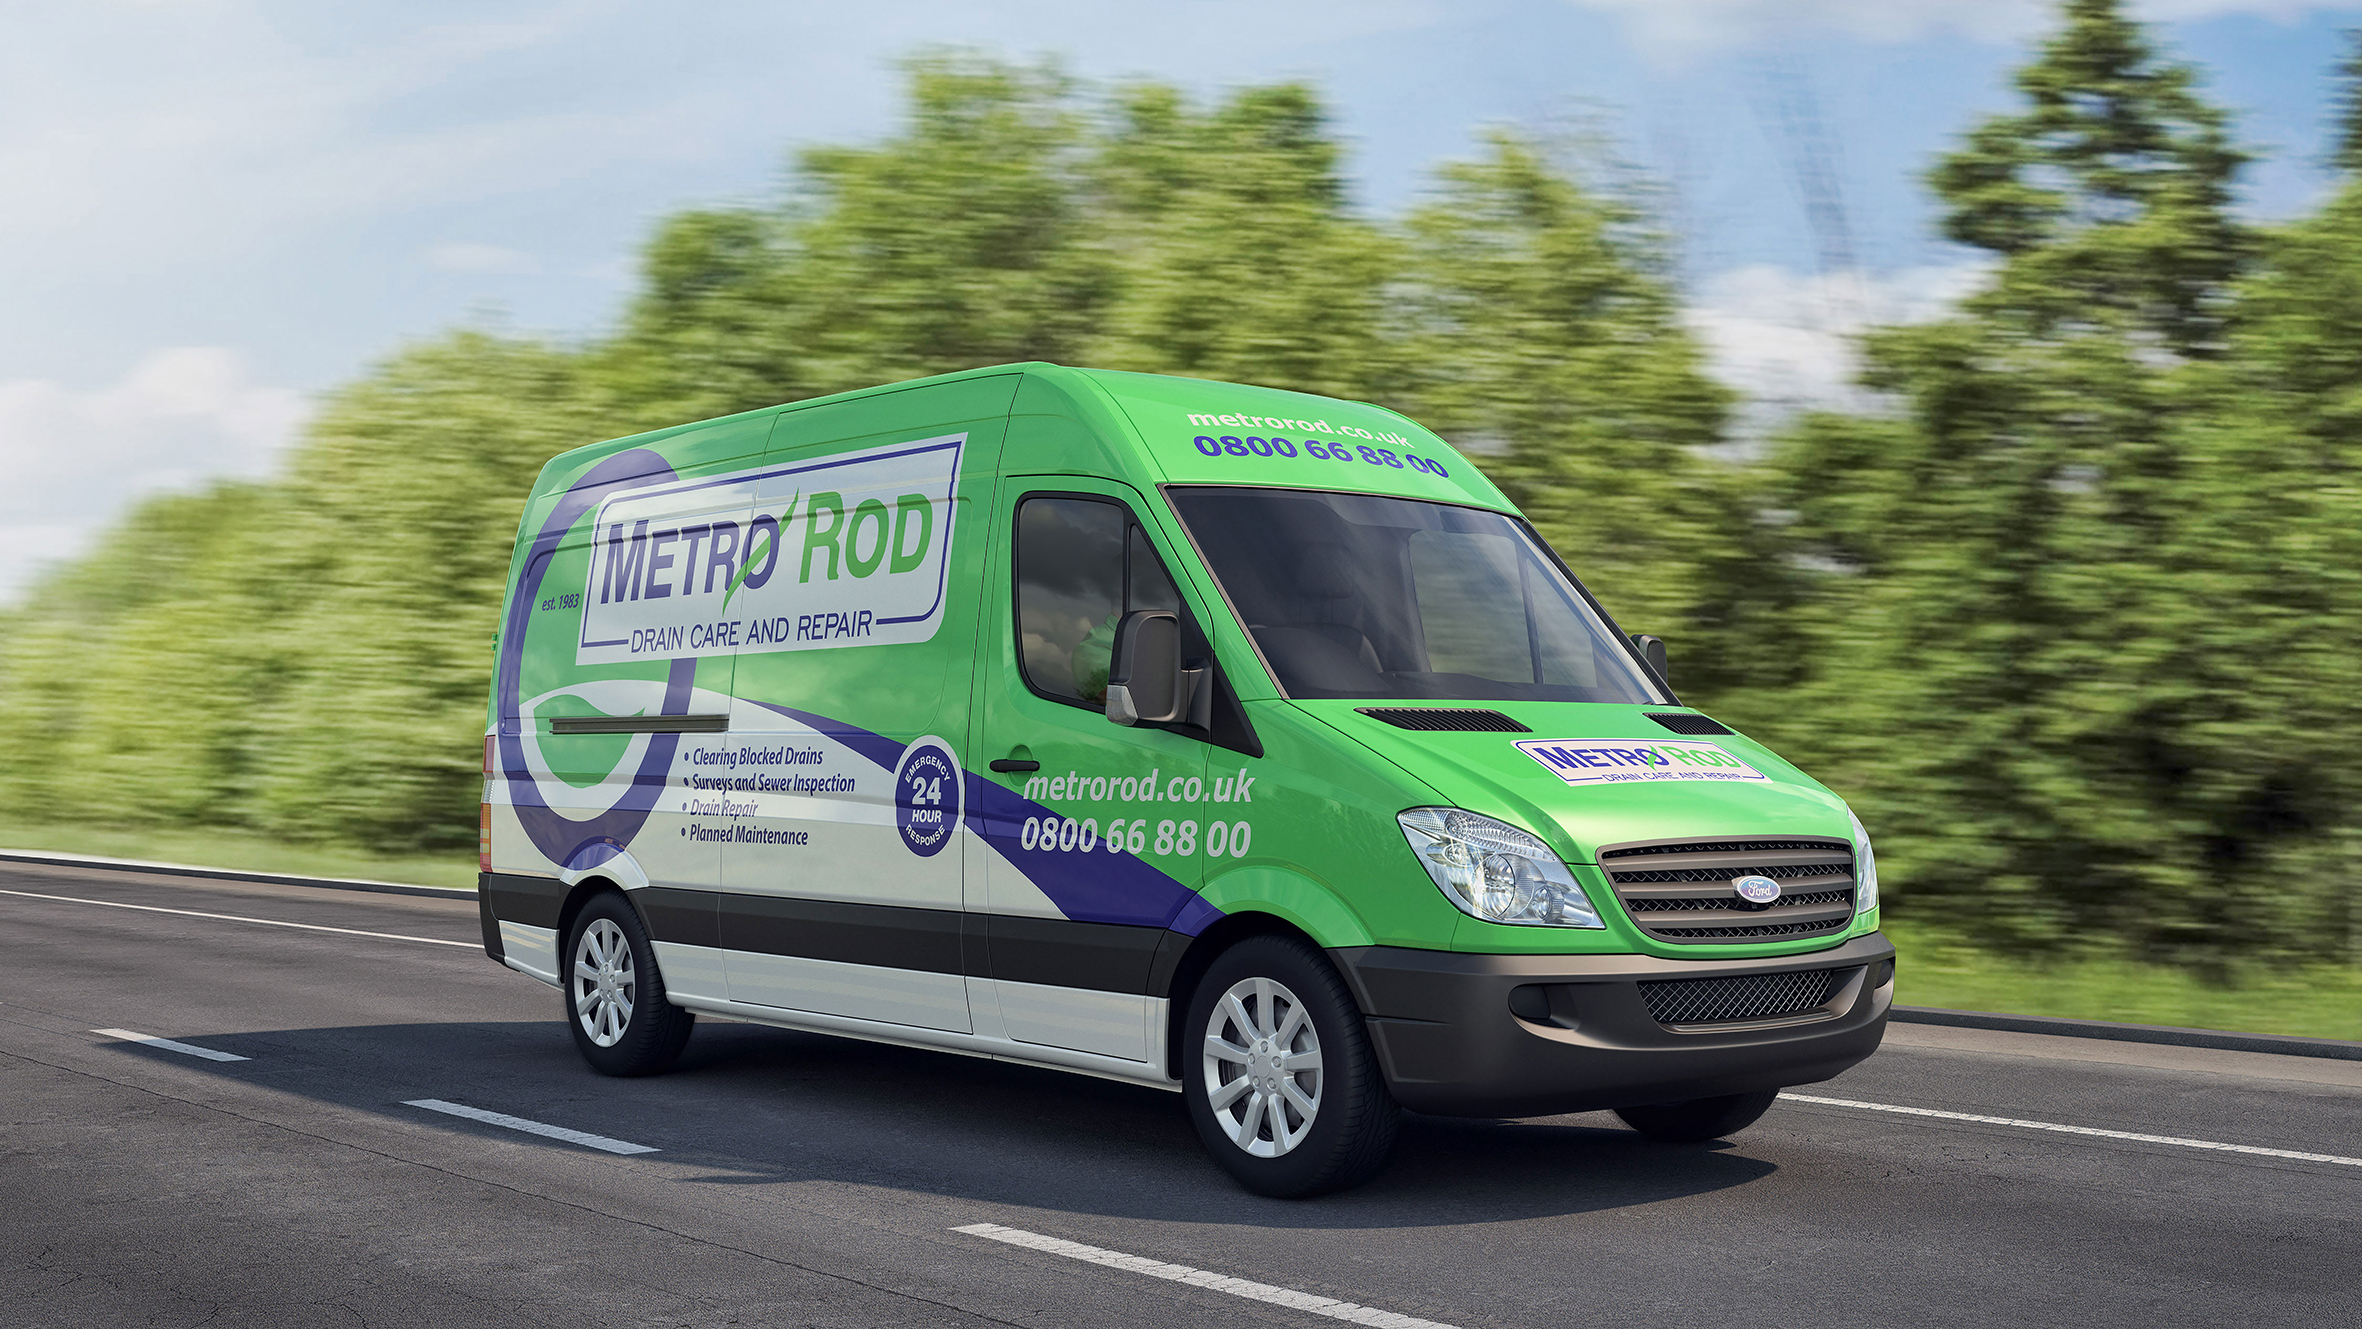 HOW CAN METRO ROD SUPPORT YOUR BUSINESS REOPENING?